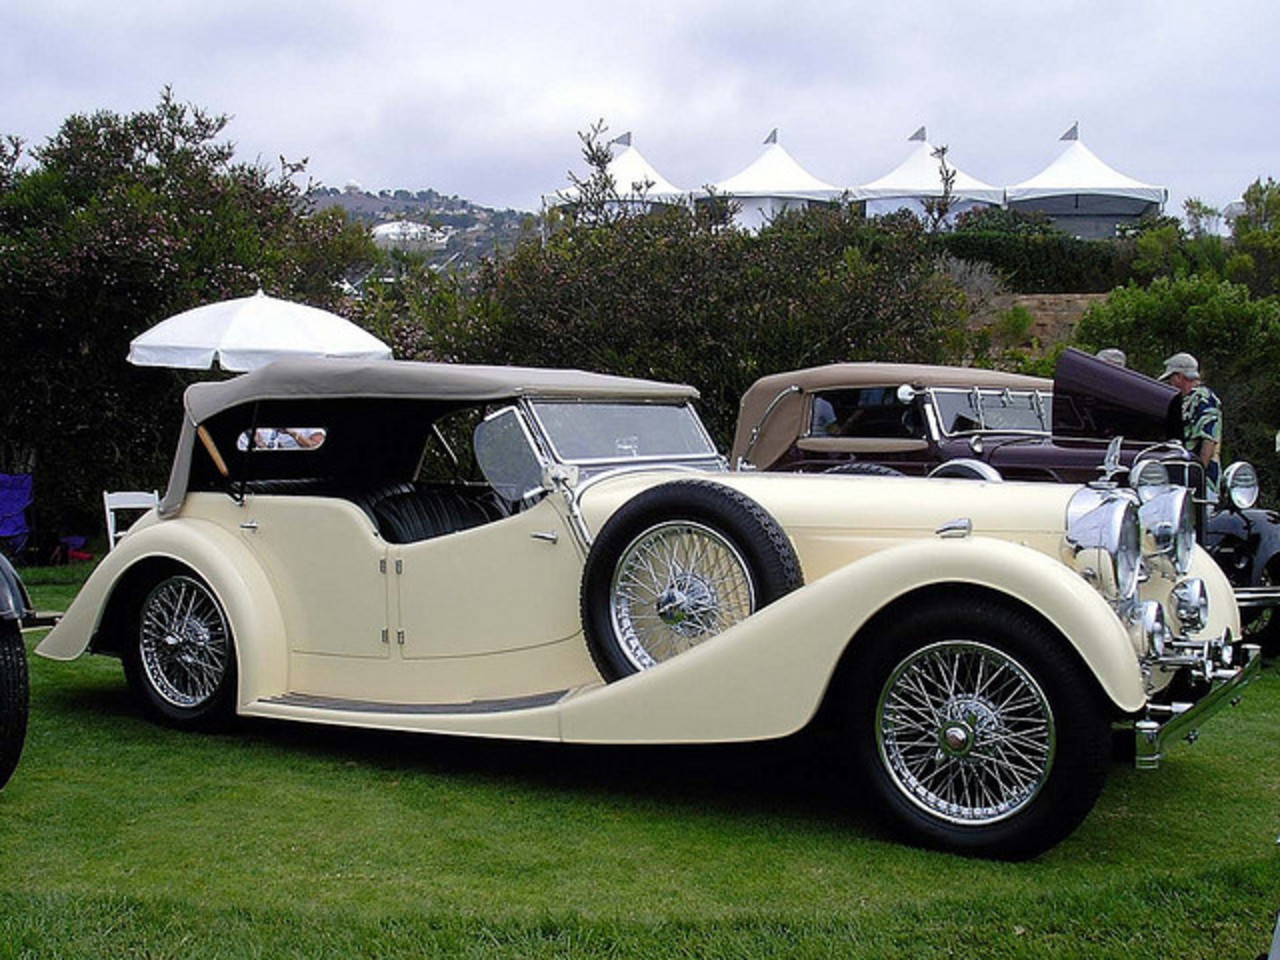 1938 Alvis Speed 25 Touring Convertible | Flickr - Photo Sharing!